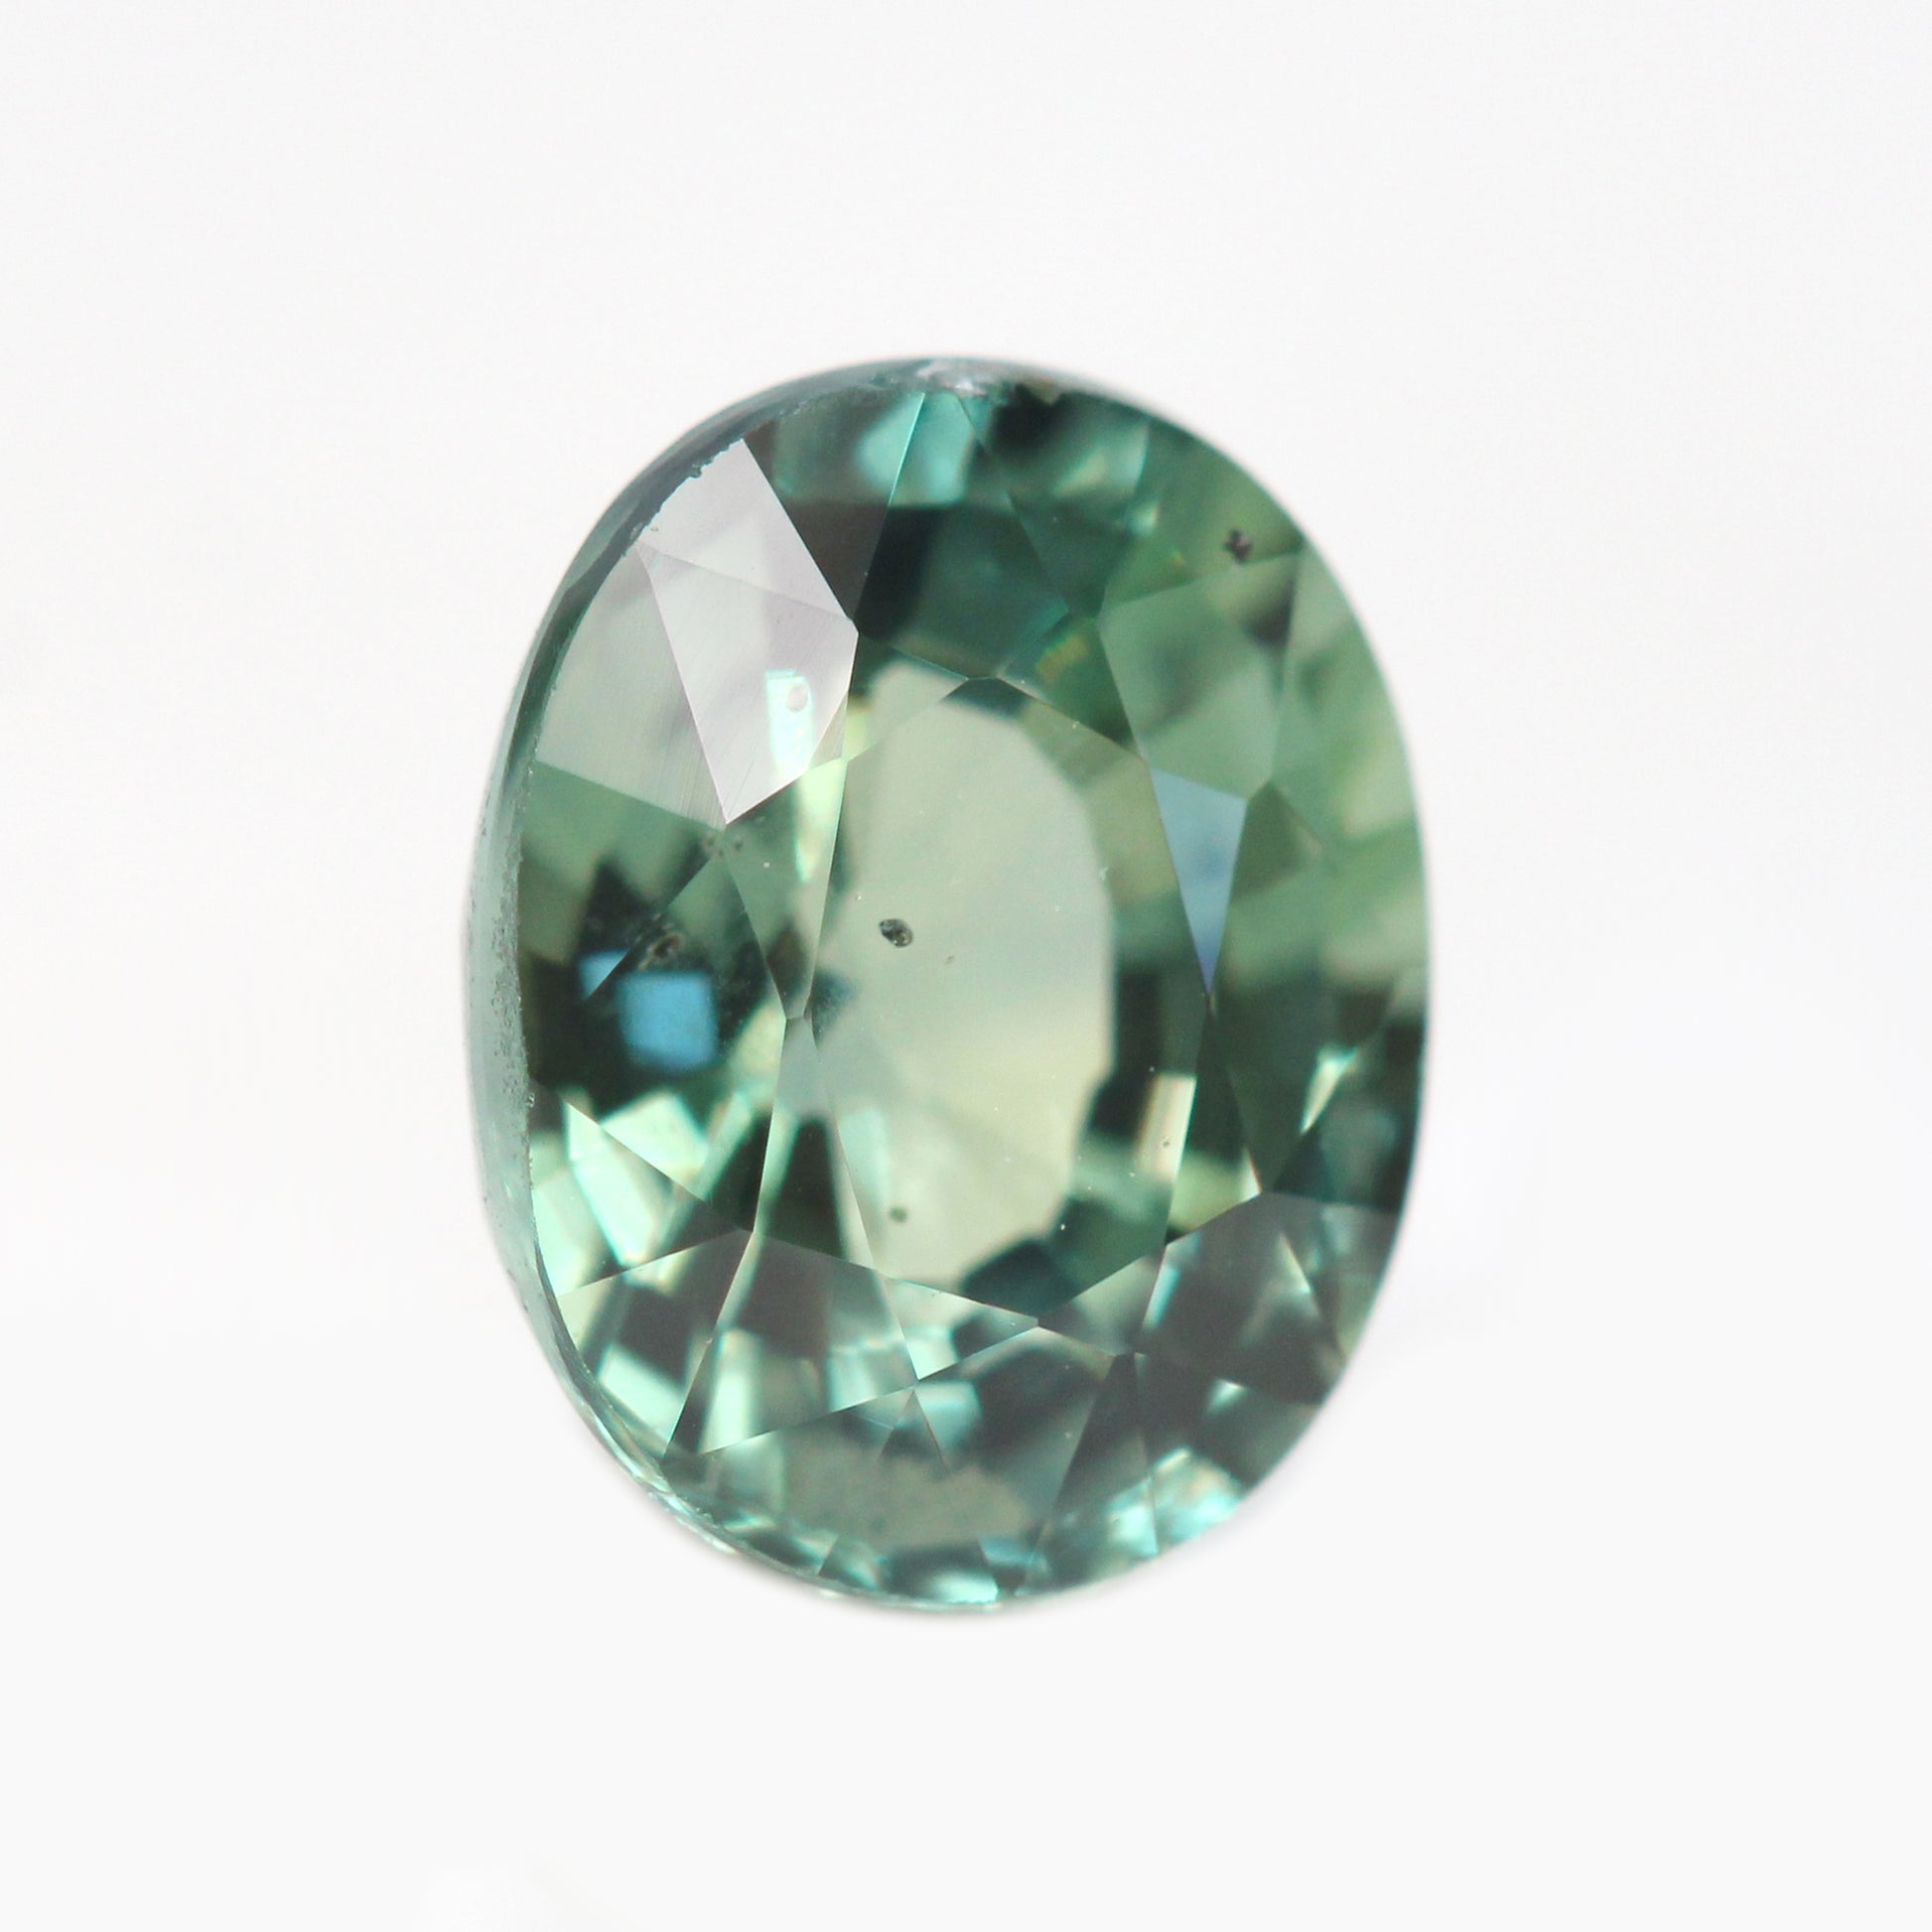 1.55 Carat Light Teal Green Oval Madagascar Sapphire for Custom Work - Inventory Code TGOS155 - Midwinter Co. Alternative Bridal Rings and Modern Fine Jewelry